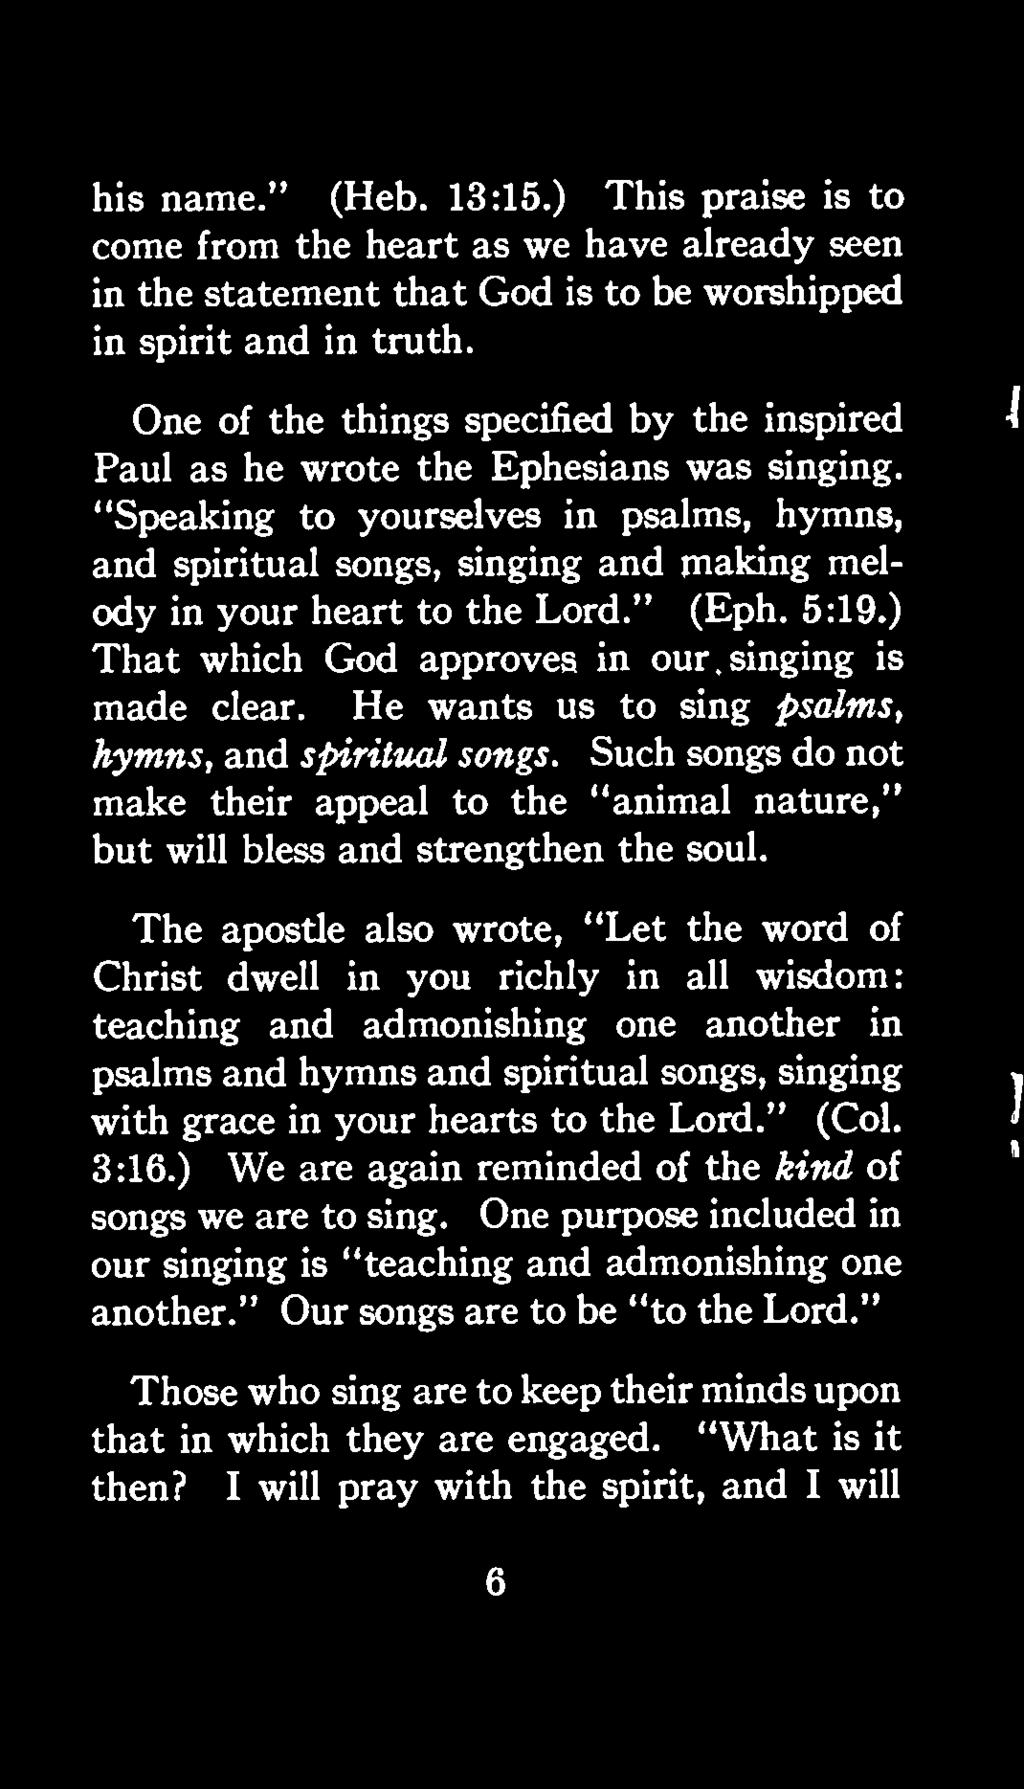 The apostle also wrote, "Let the word of Christ dwell in you richly in all wisdom: teaching and admonishing one another in psalms and hymns and spiritual songs, singing with grace in